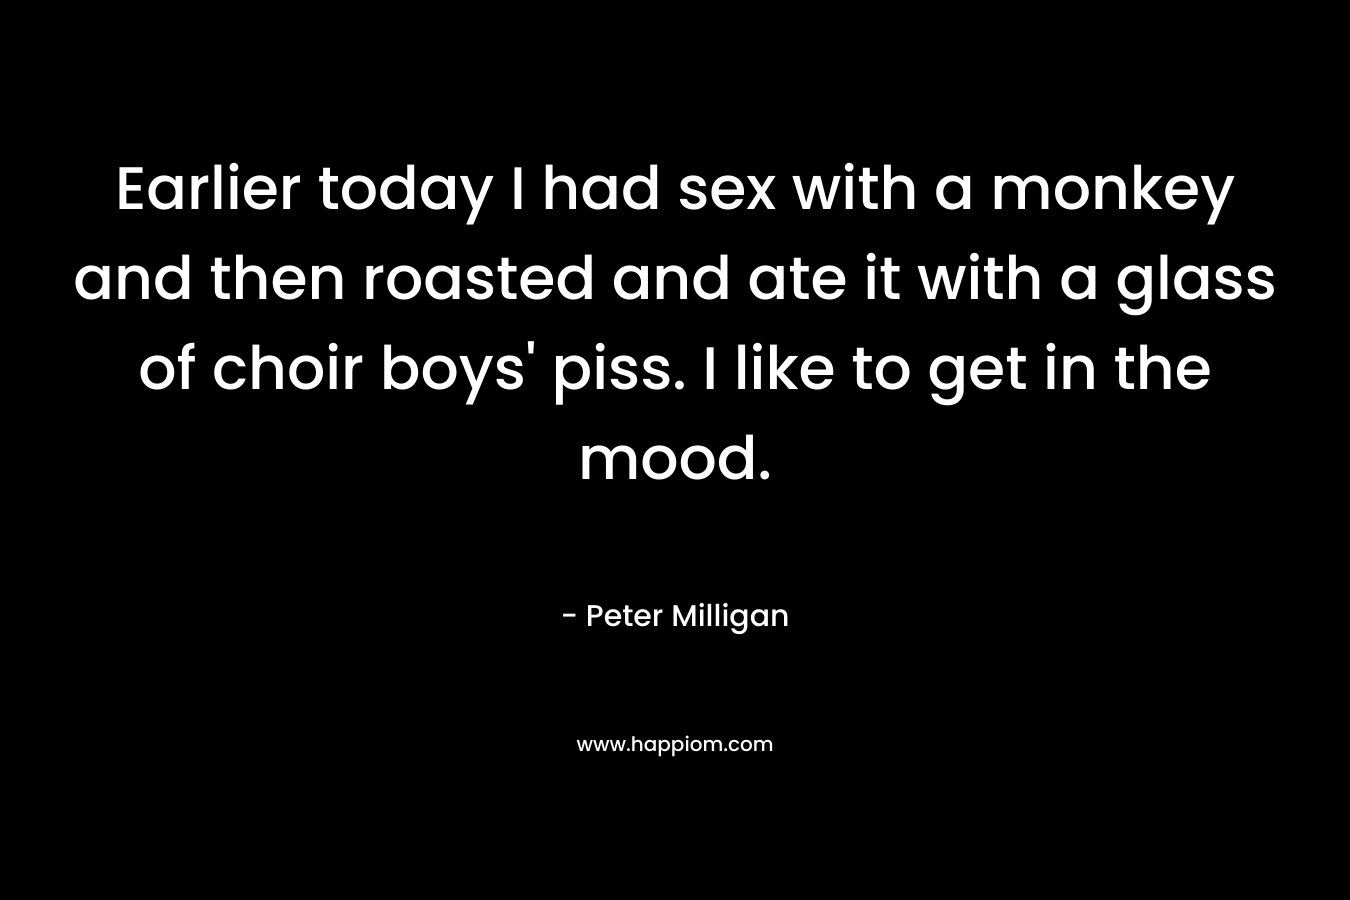 Earlier today I had sex with a monkey and then roasted and ate it with a glass of choir boys’ piss. I like to get in the mood. – Peter Milligan